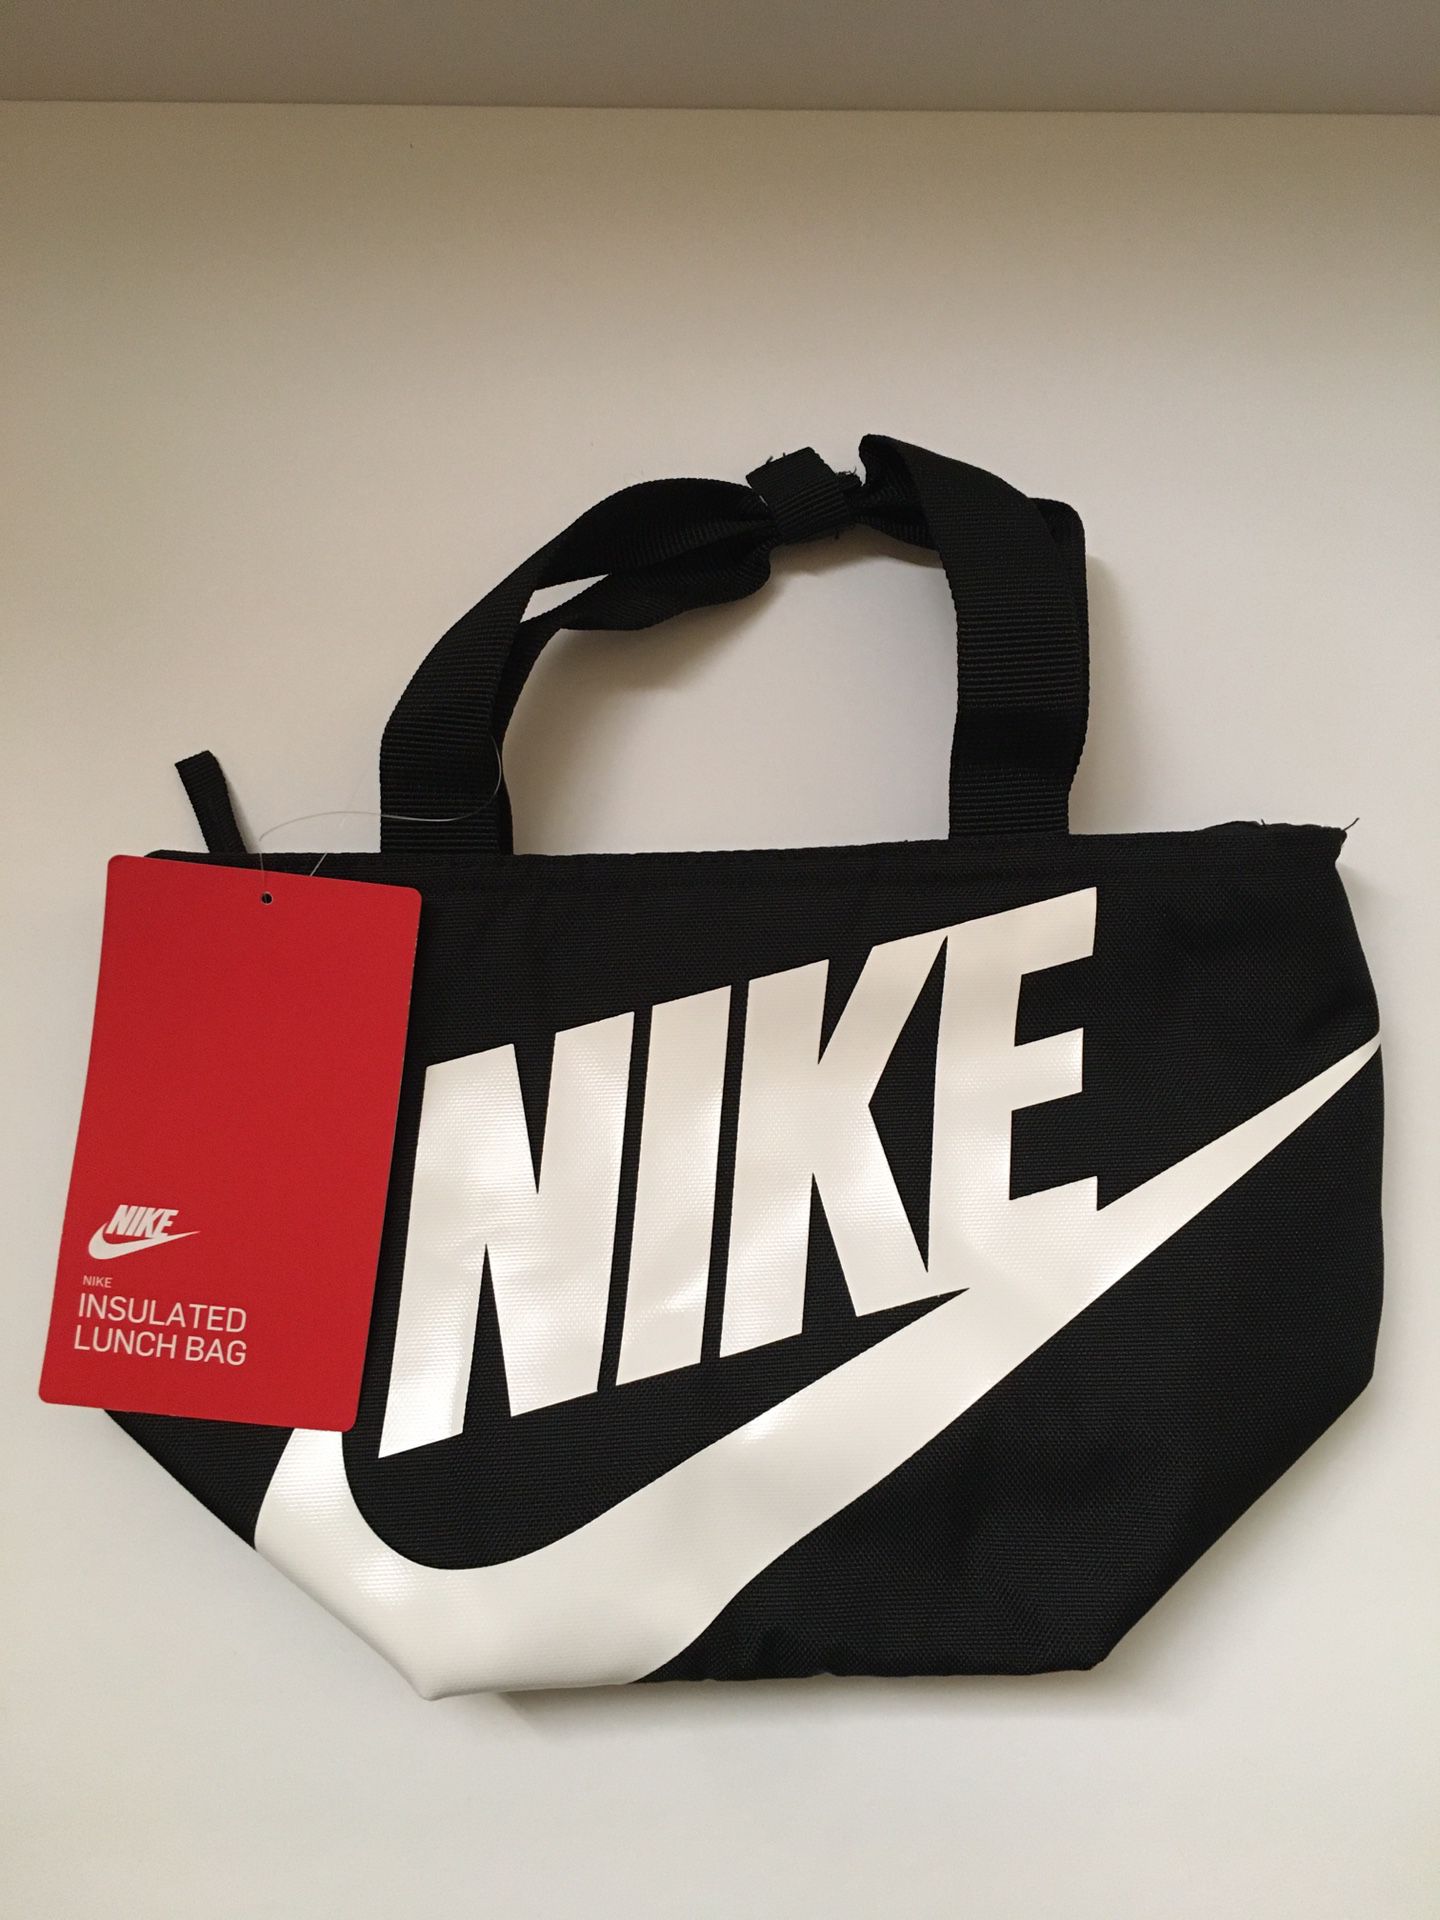 Nike Insulated Lunch Bag